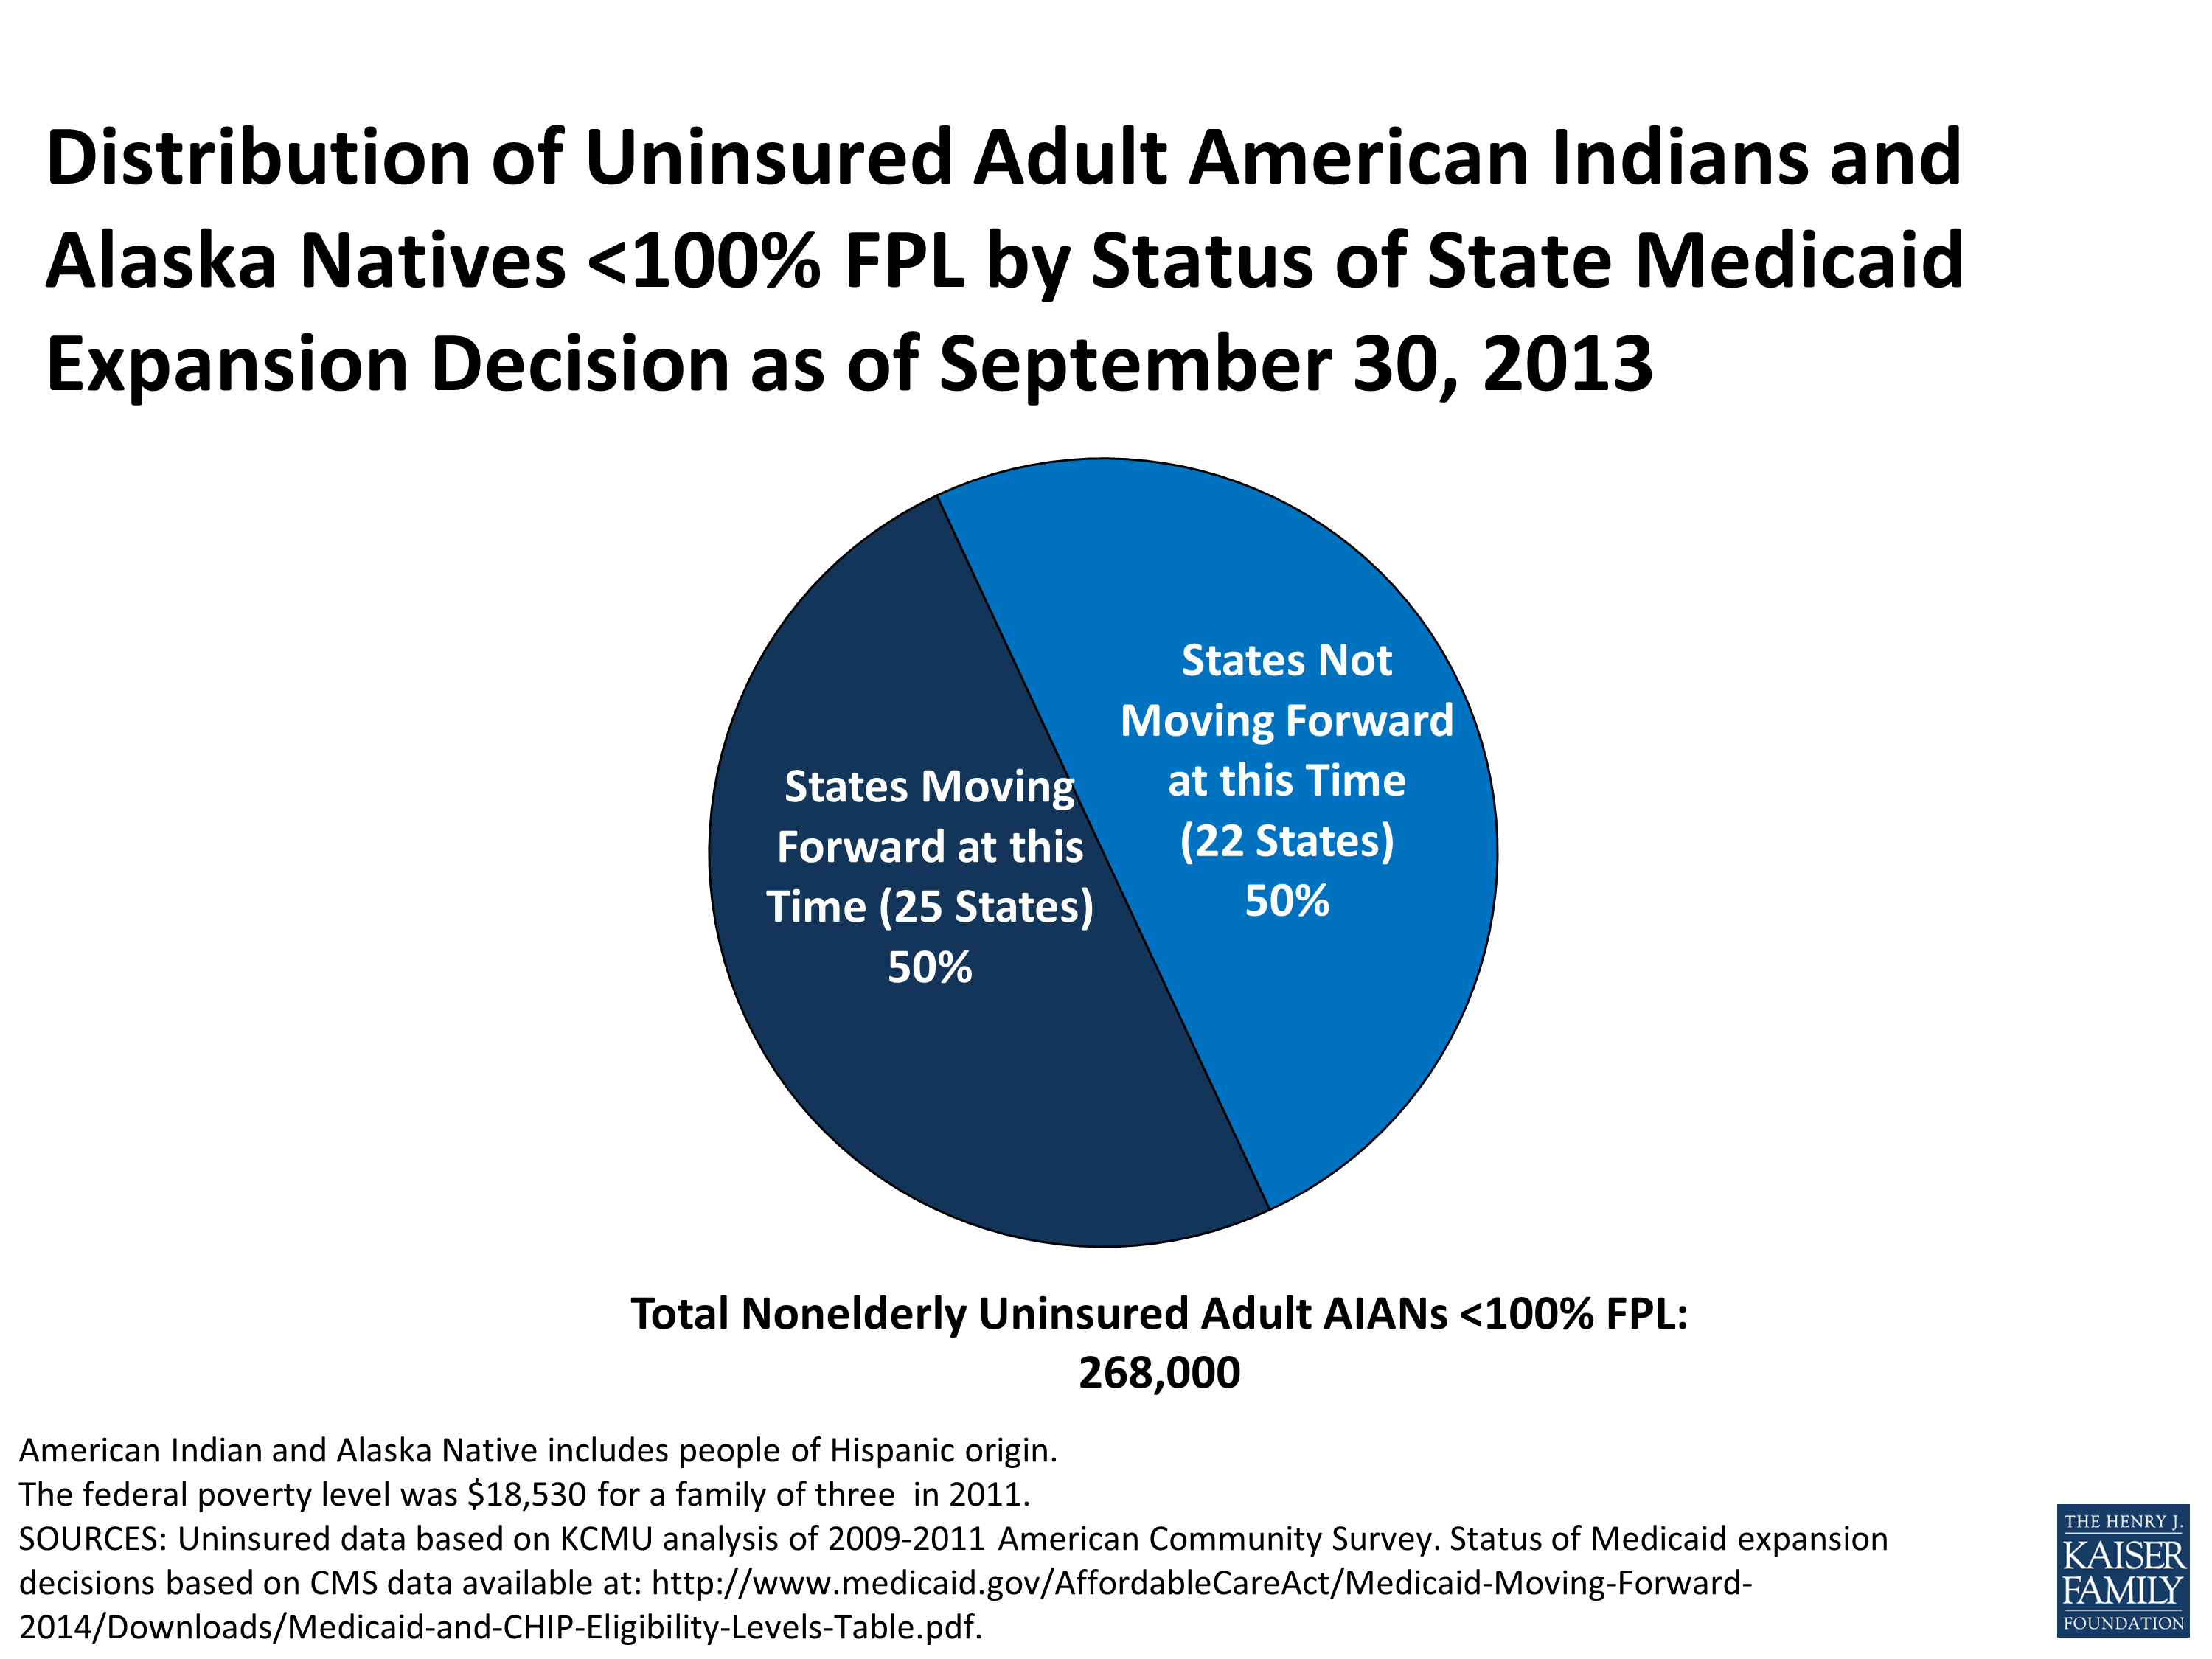 Health Coverage And Care For American Indians And Alaska Natives